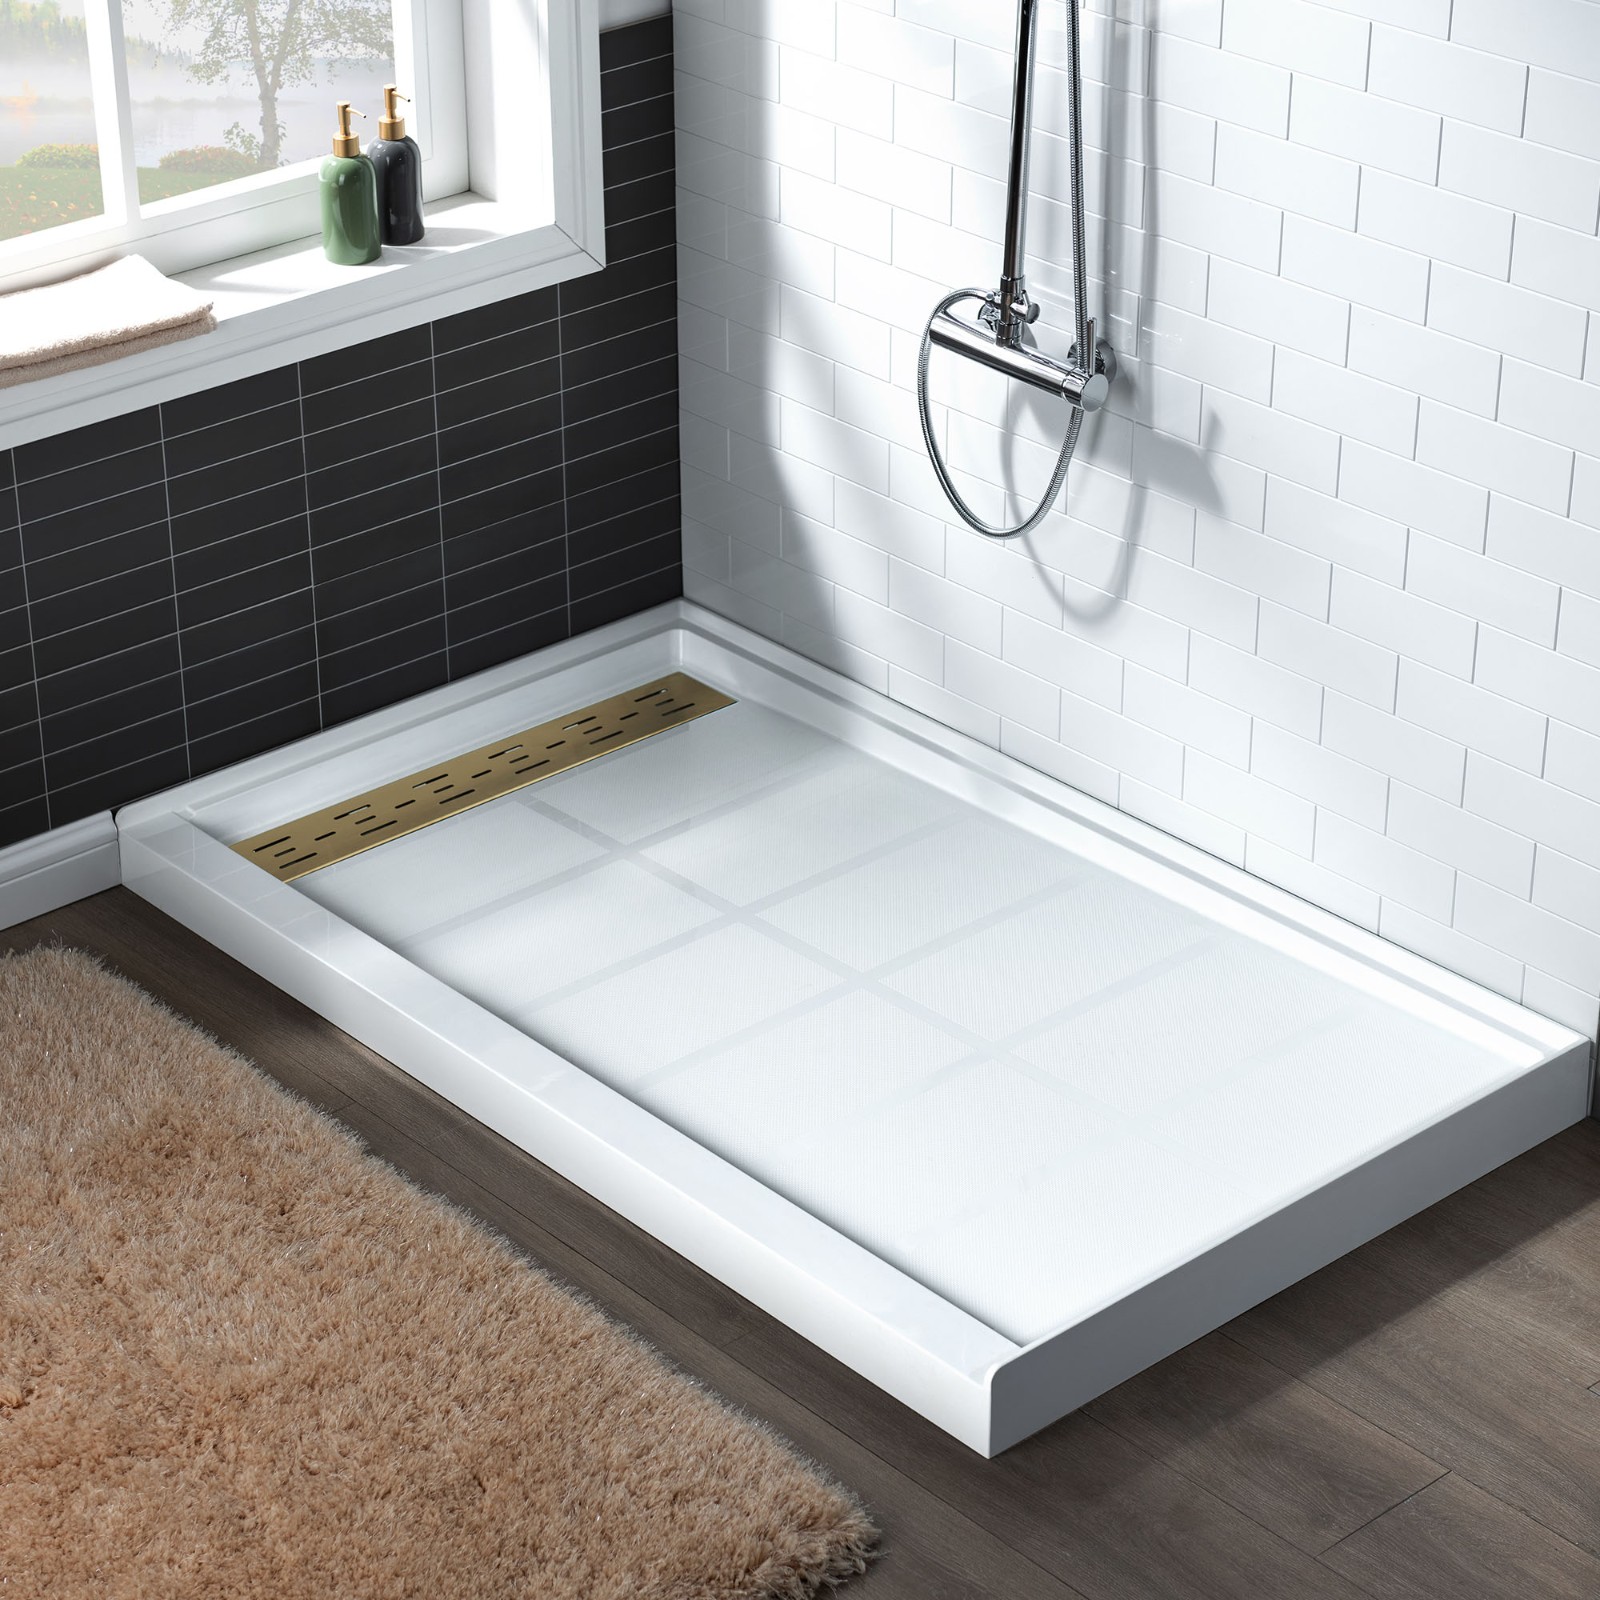  WOODBRIDGE SBR4836-1000L-BG SolidSurface Shower Base with Recessed Trench Side Including Brushed Gold Linear Cover, 48